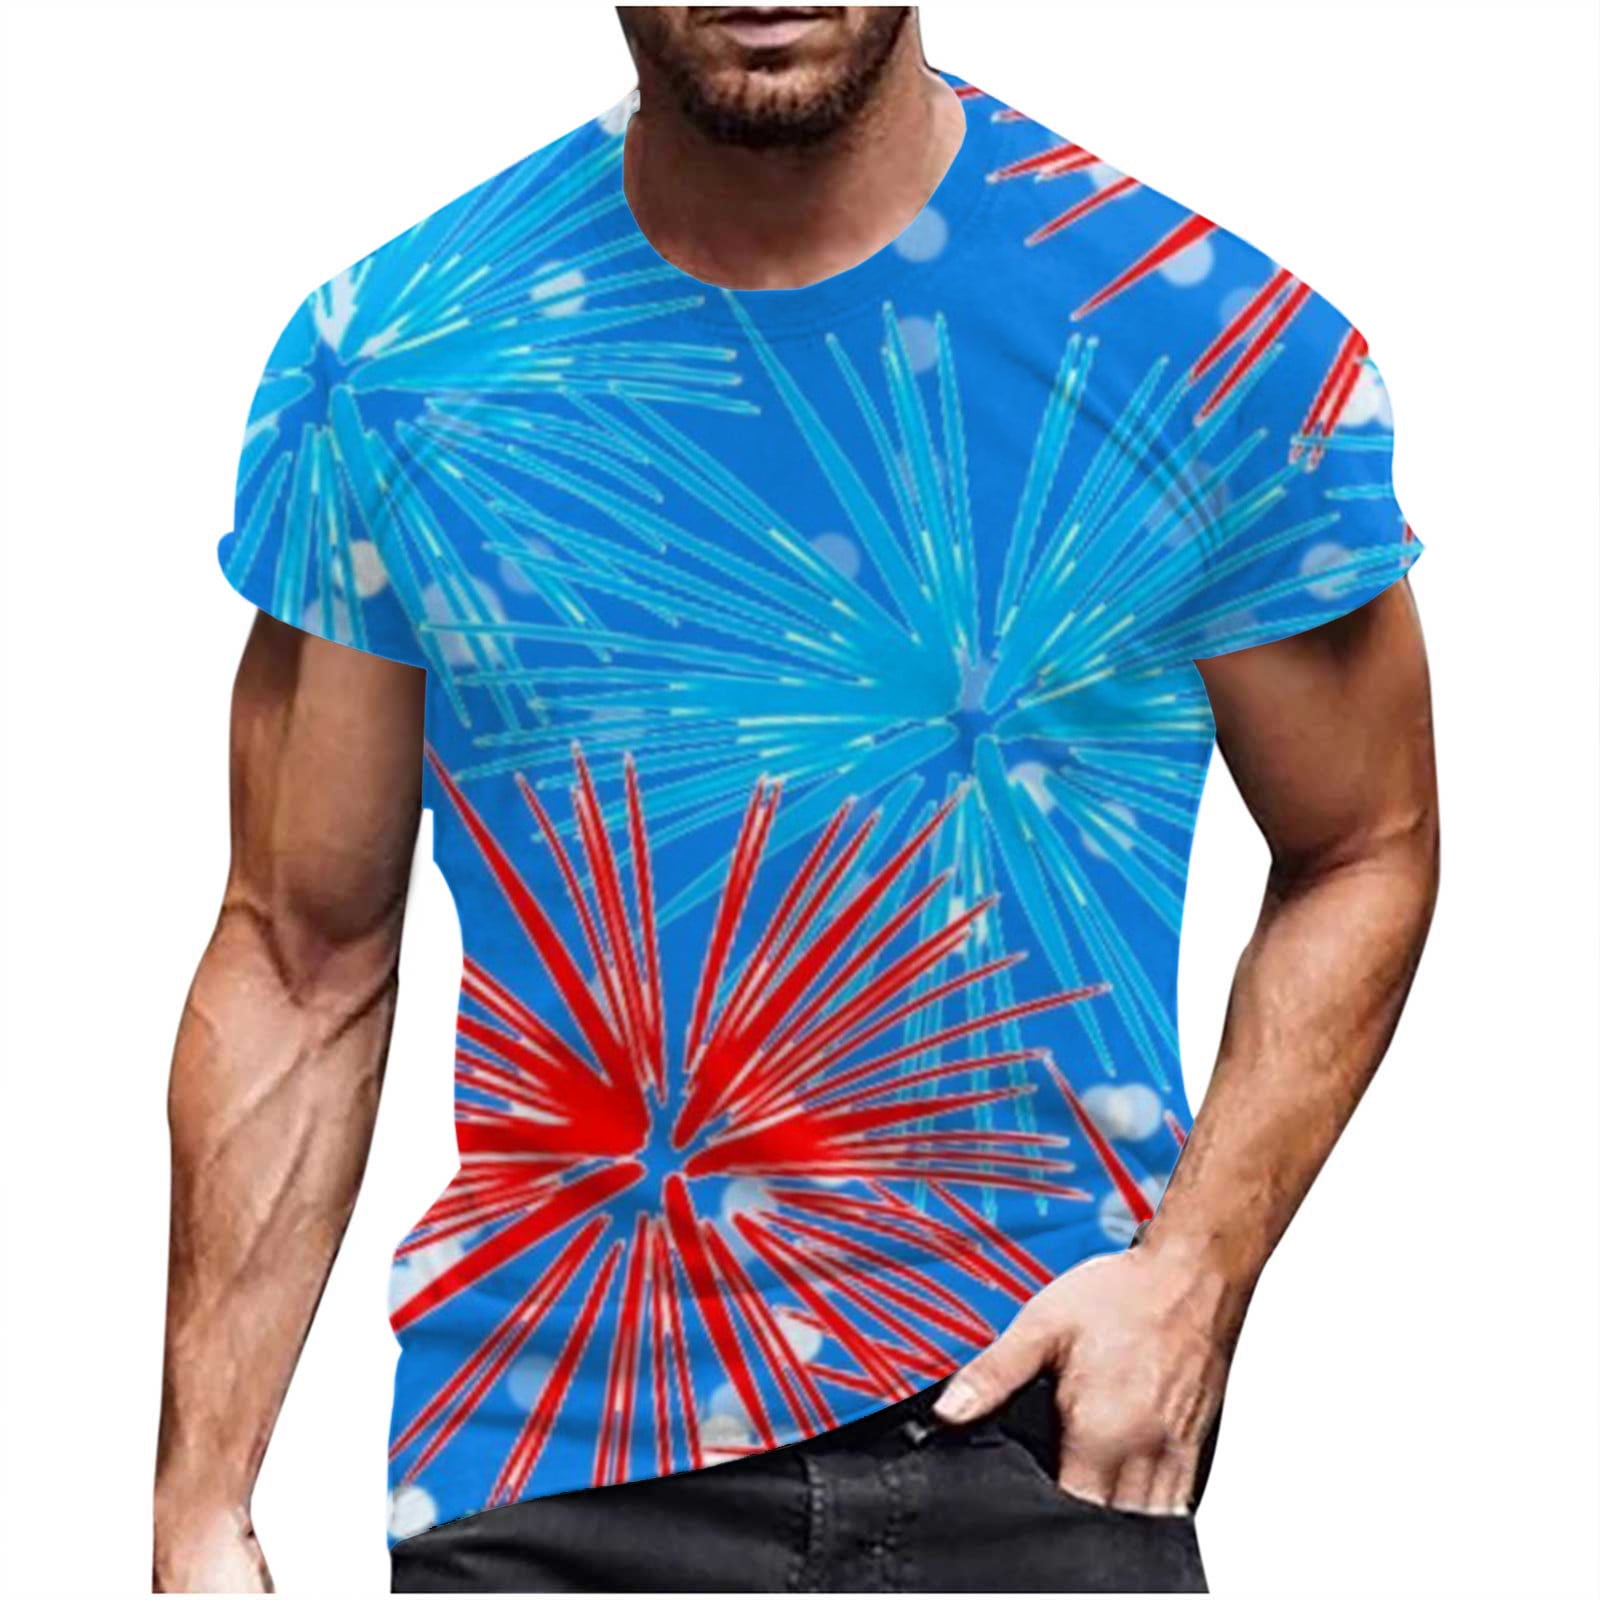 DTBPRQ American Flag Shirts for Men Graphic Tees Casual 4th of July ...